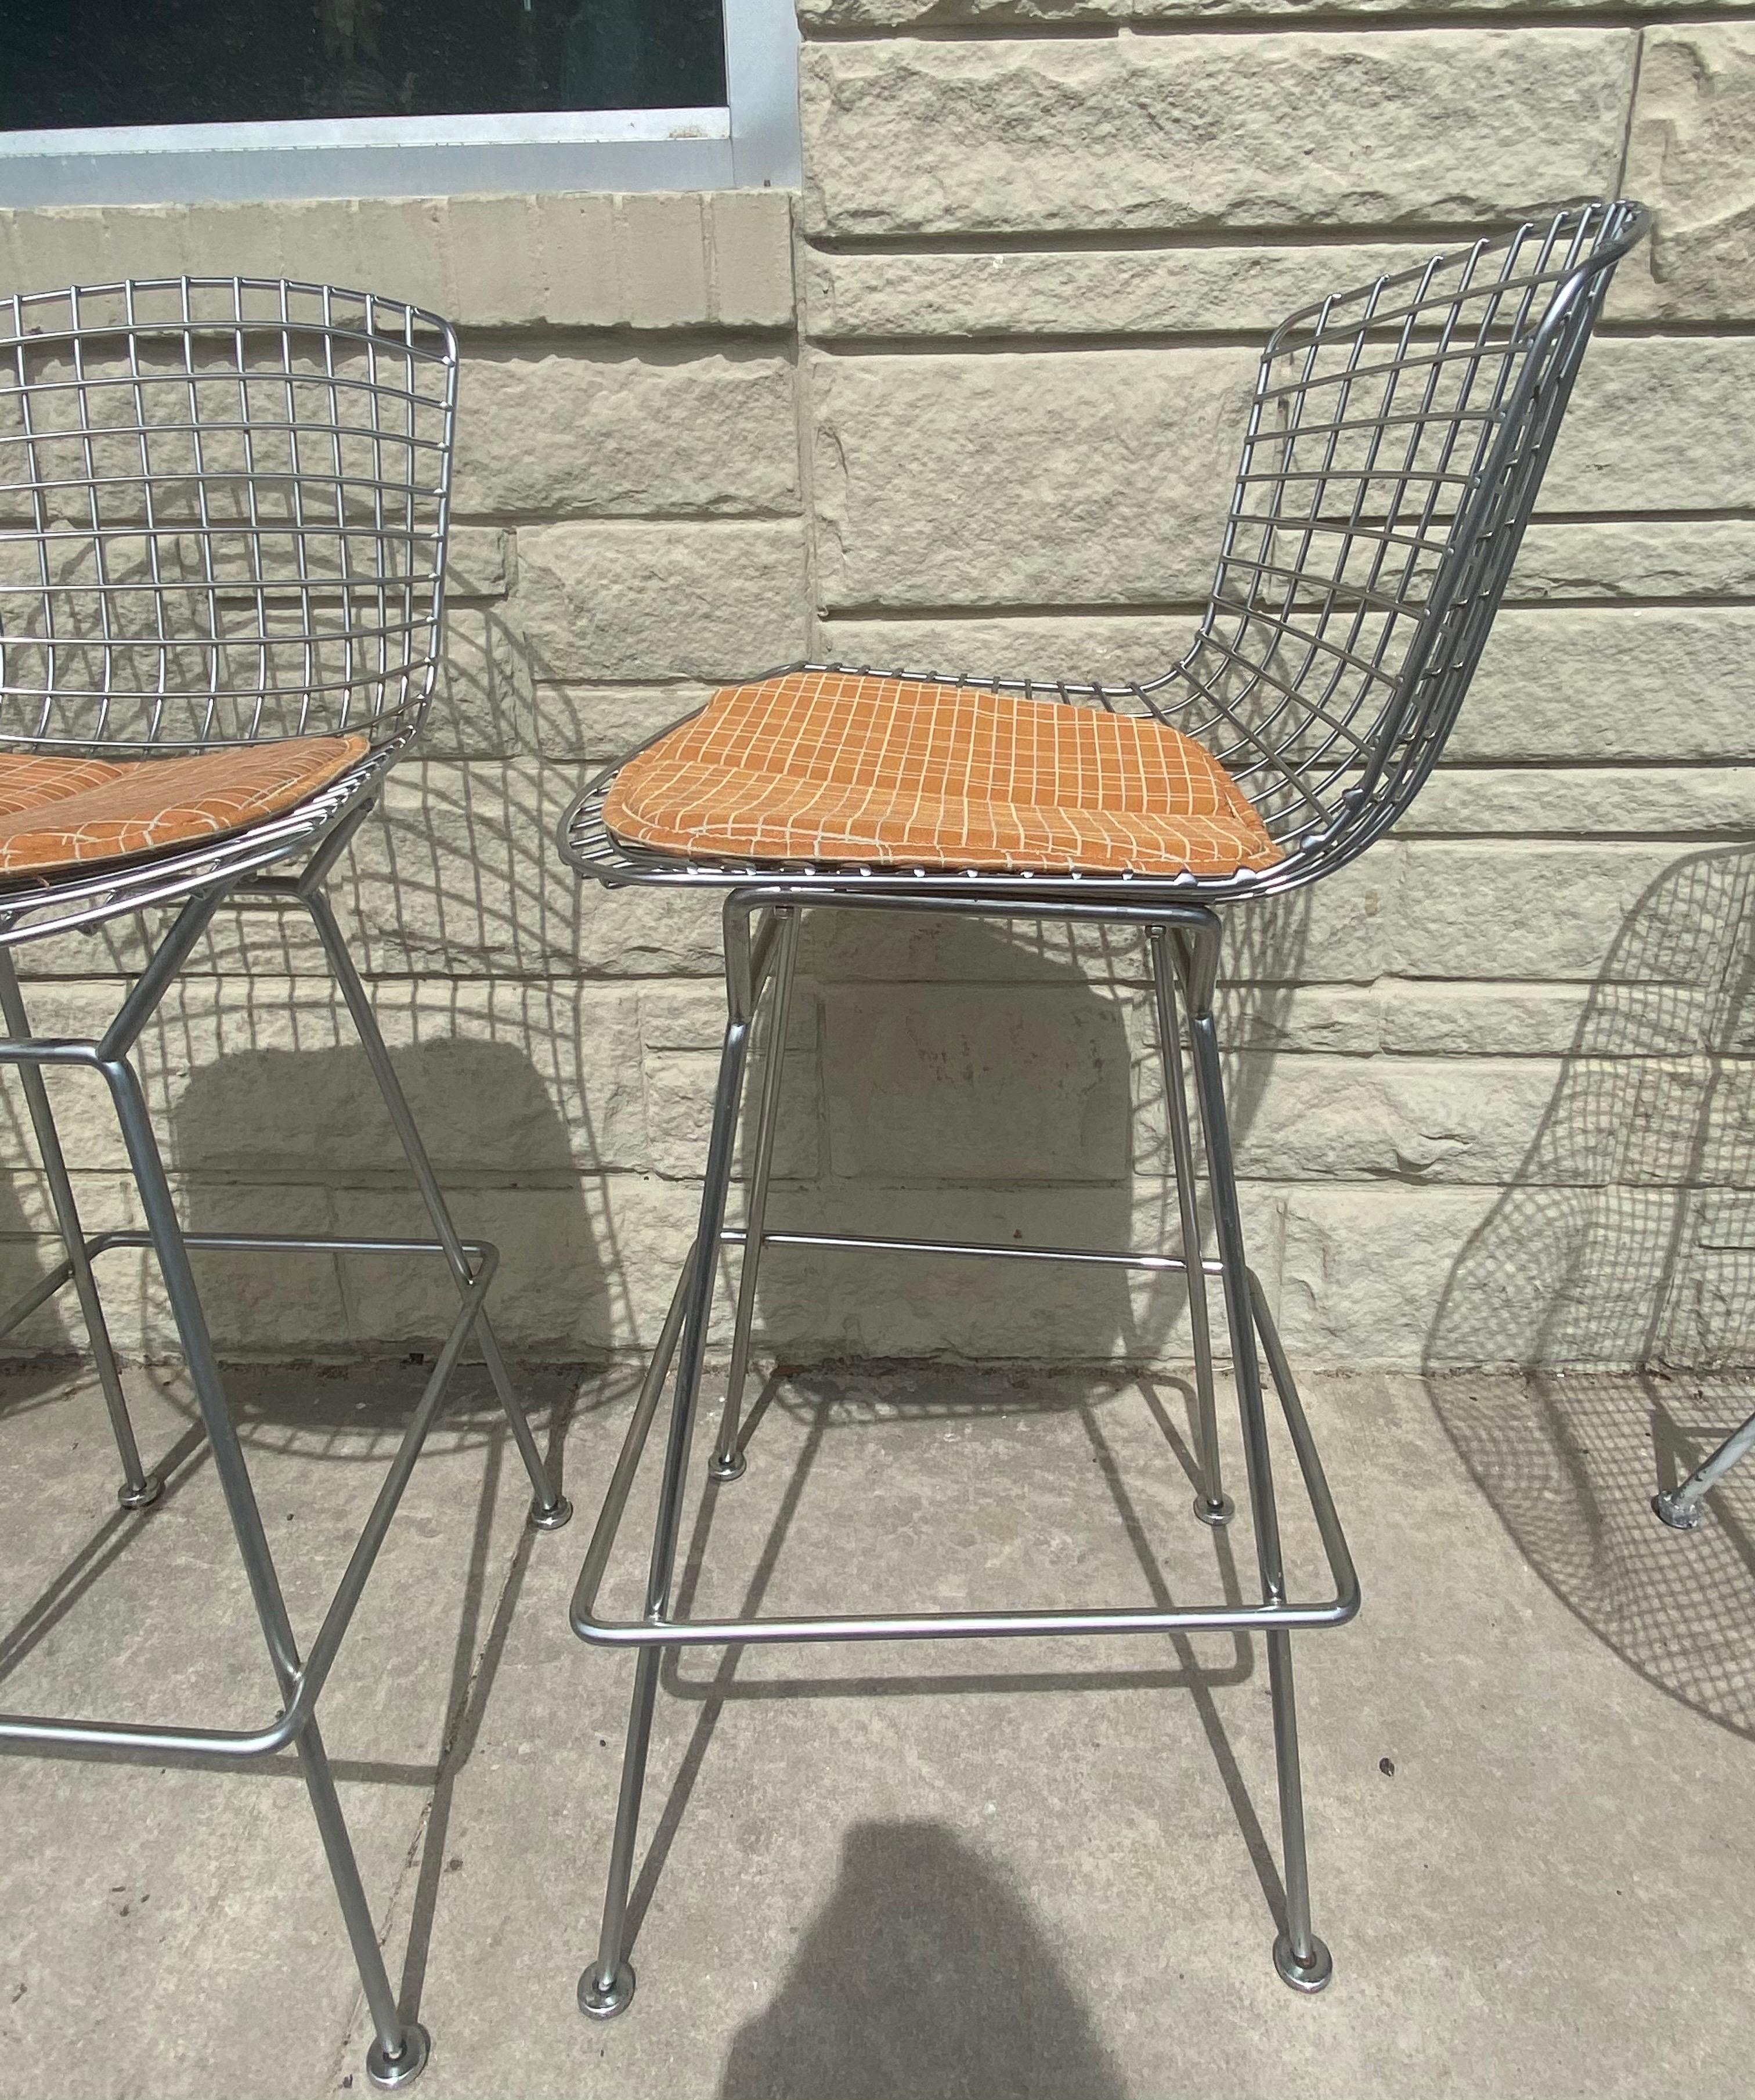 Set of 4 Harry Bertoia Barstools for Knoll in satin chrome. The seat and base are welded steel rods and seat pads snap directly onto the frame. The Bertoia Barstool is part of Harry Bertoia's iconic 1952 wire collection, an astounding study in